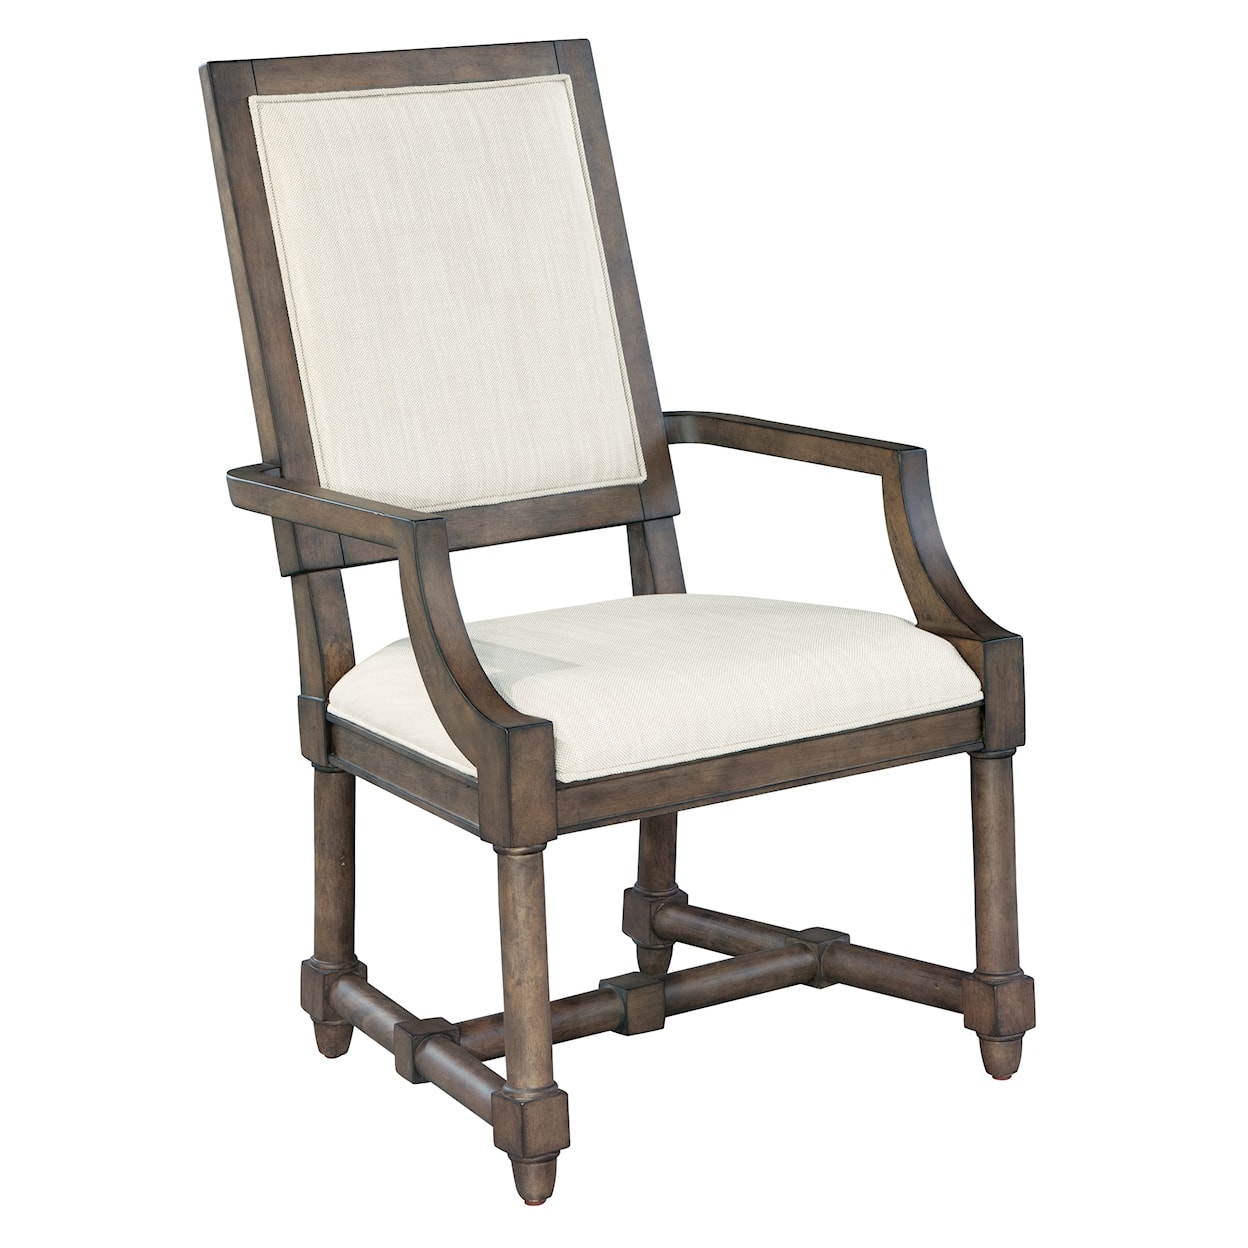 Hekman Lincoln Park Upholstered Dining Arm Chair